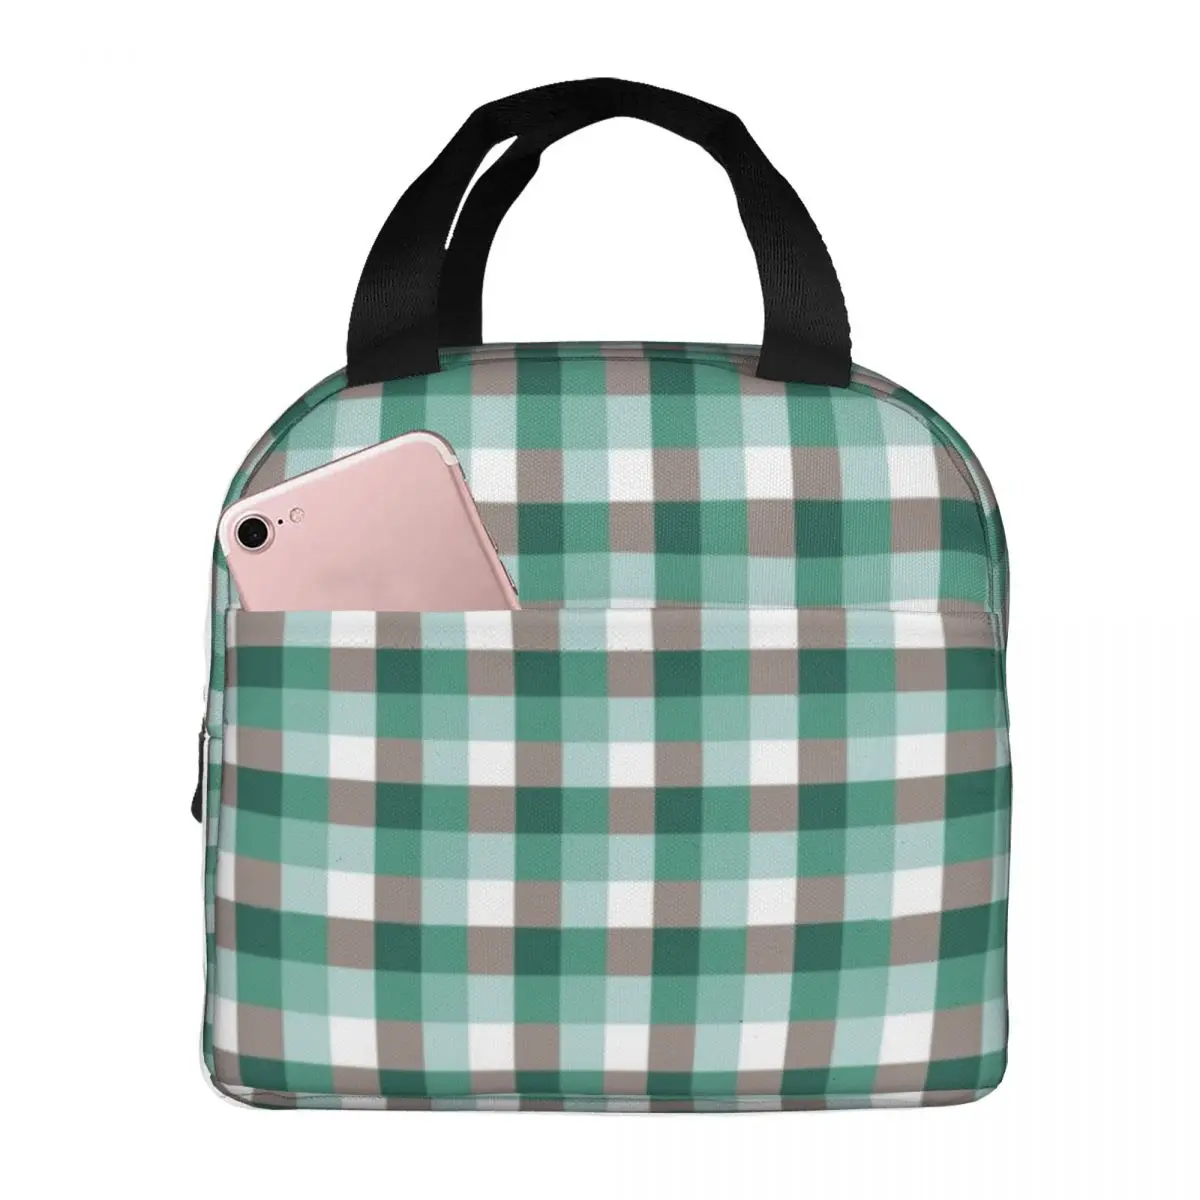 

Mint And Chocolate Thermal Insulated Lunch Bags Reusable Food Handbags cooler Tote Lunch Box Office Teacher